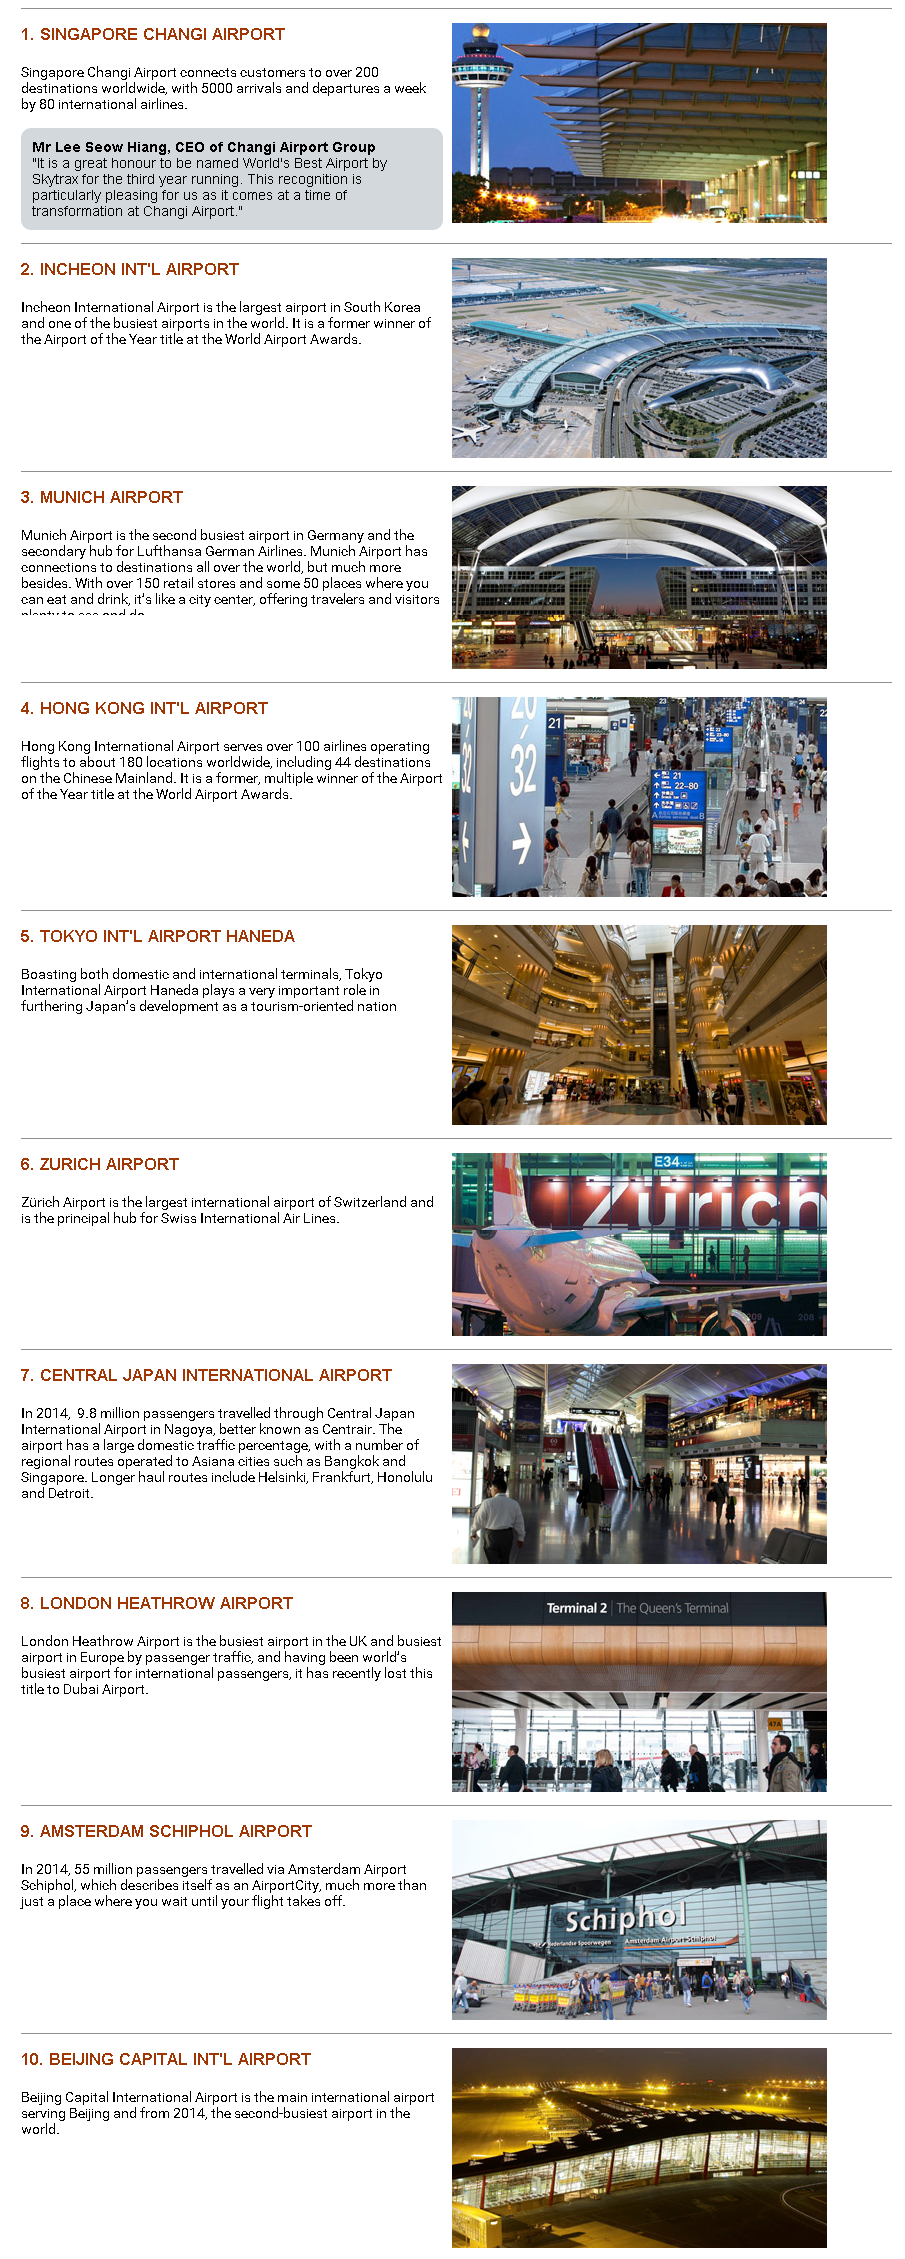 We present the world's Top 10 Airlines of 2015, as voted for by customers around the world. Scroll down the page to discover more about these airports.